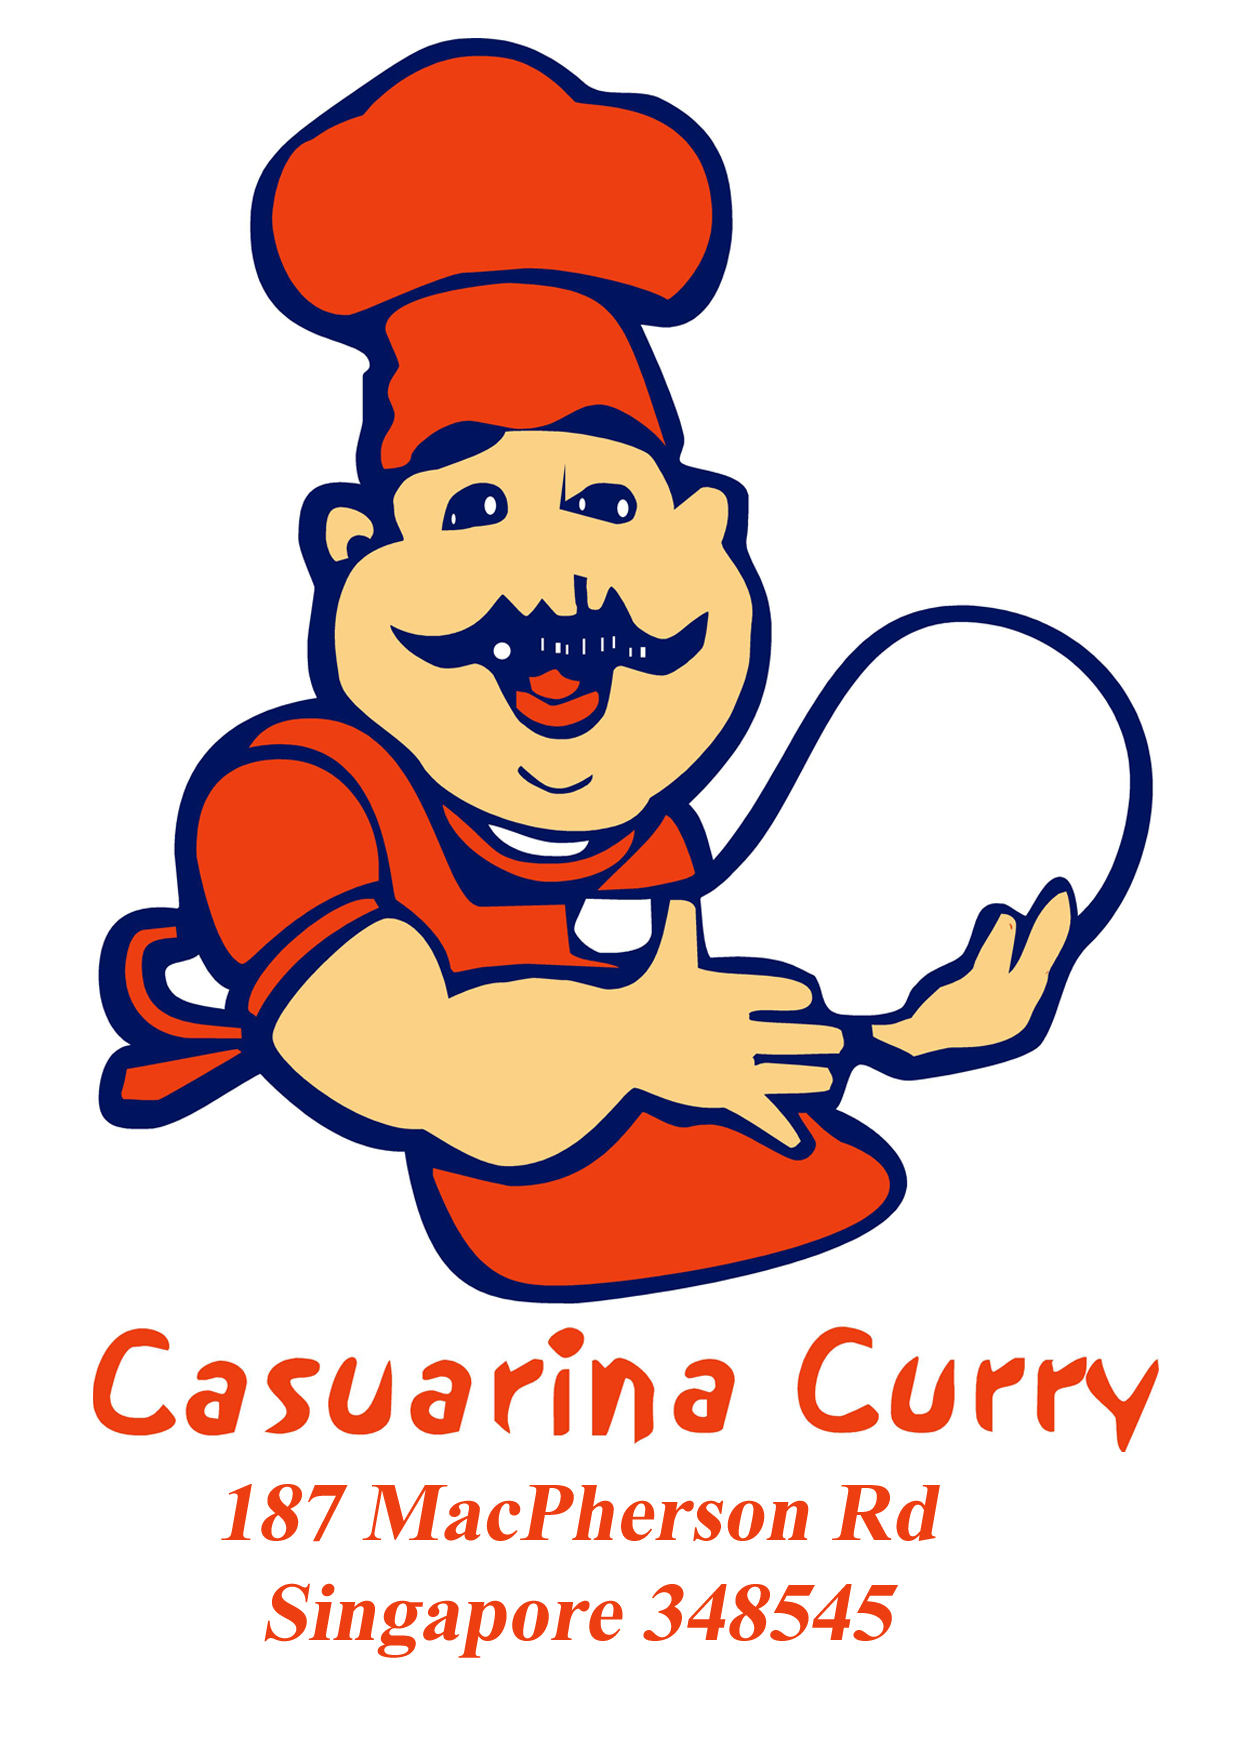 Casuarina Curry Restaurant and Catering (Macpherson Rd)